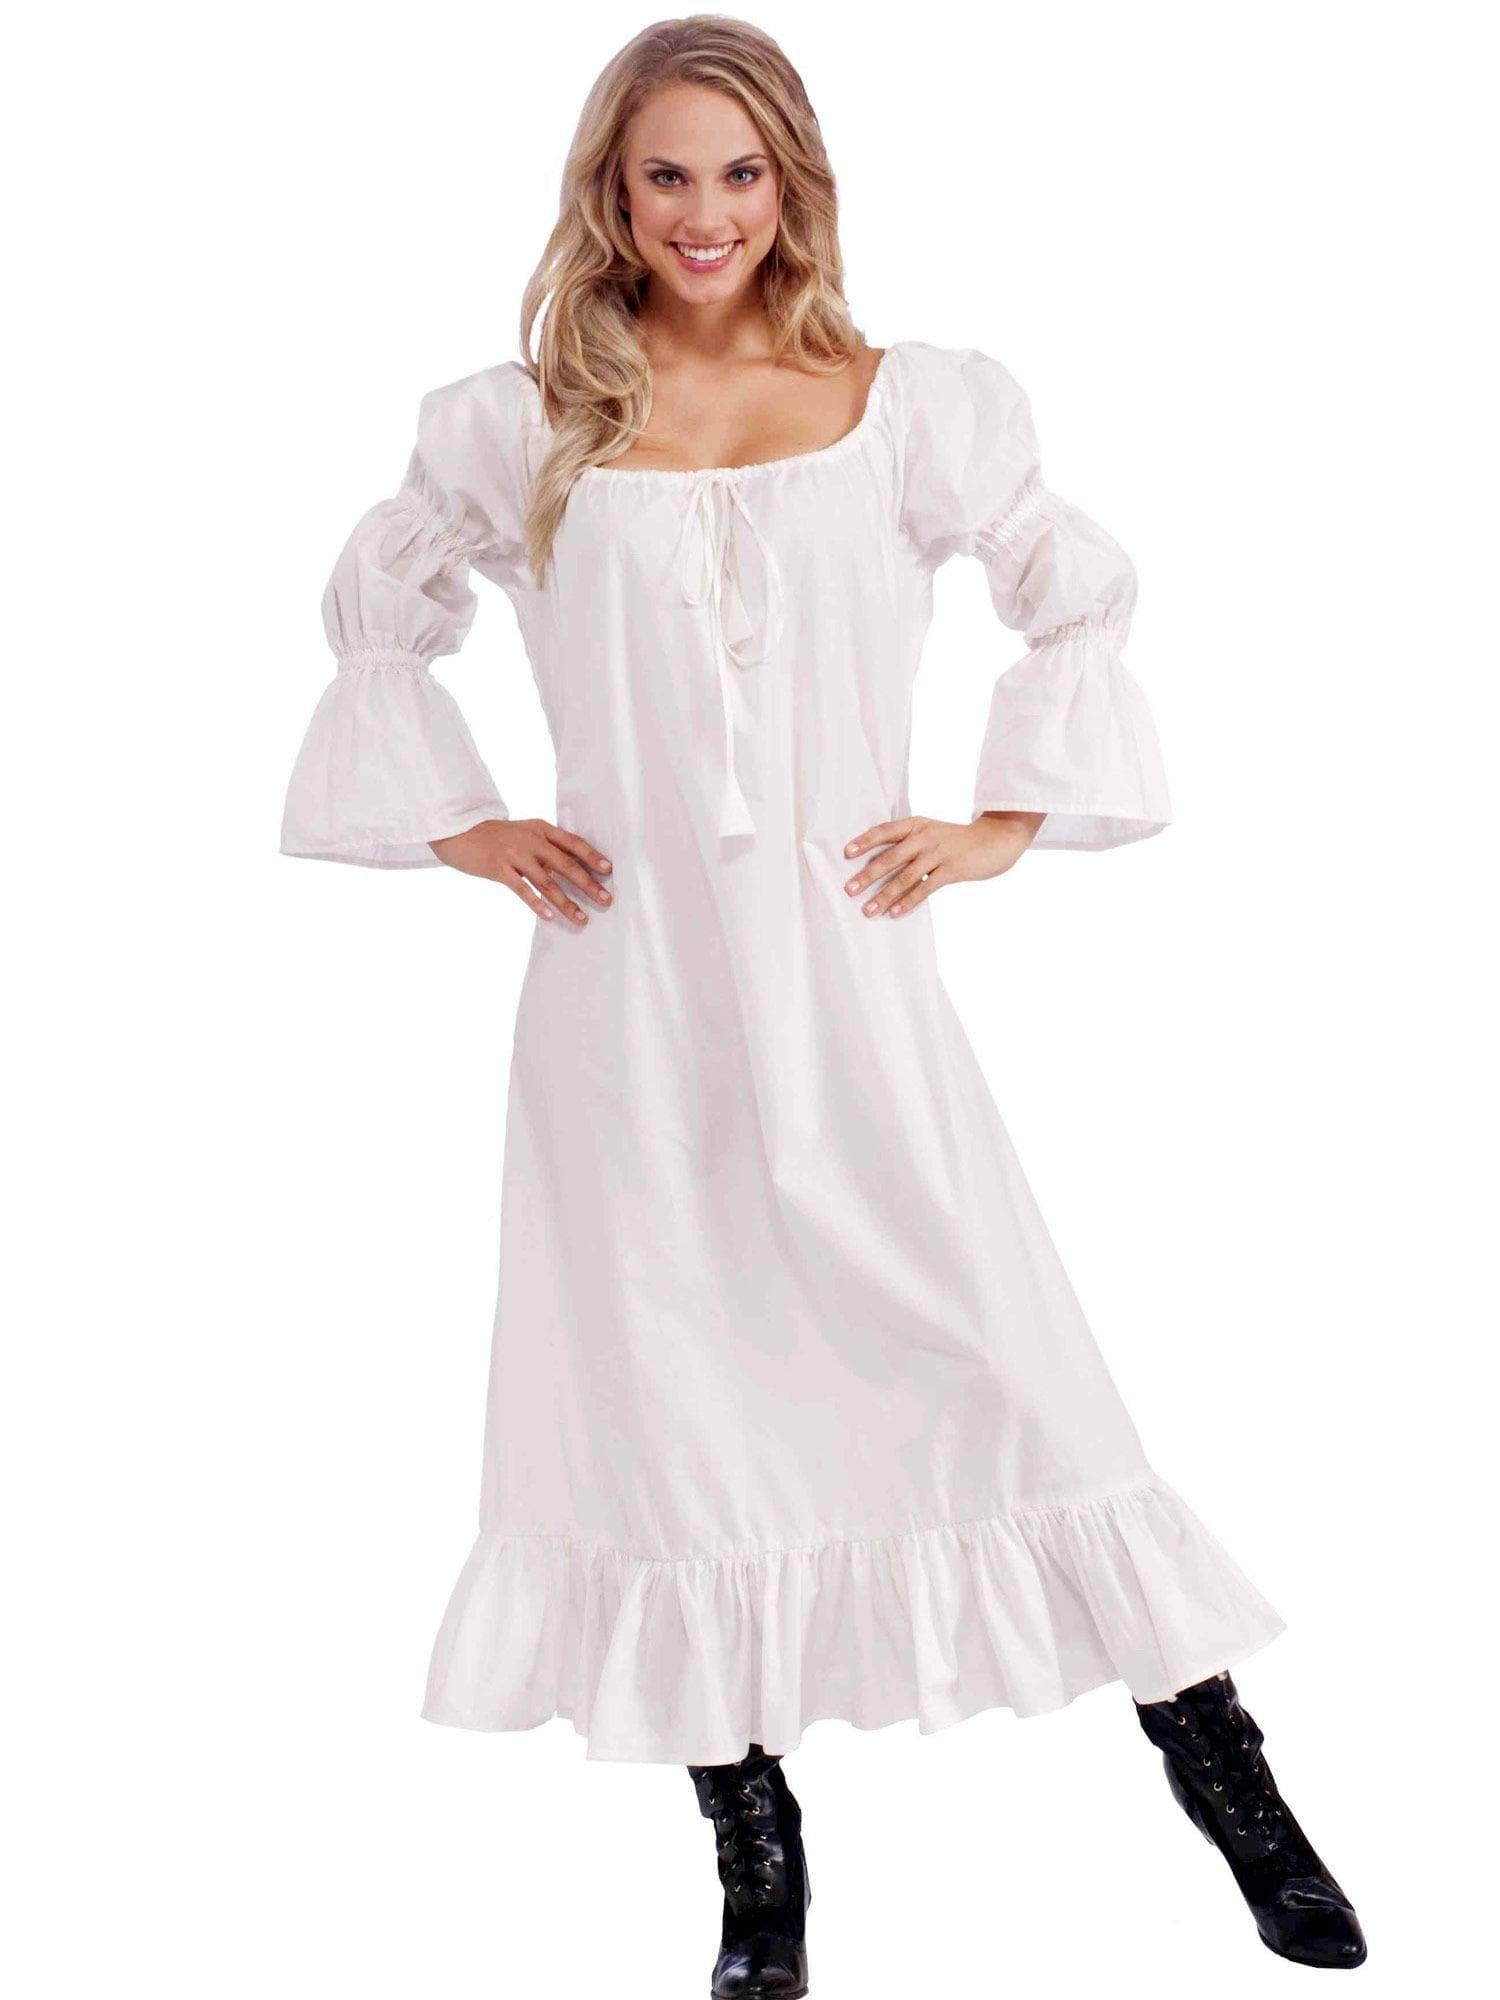 Adult Medieval Lady Chemise Gown Costume - costumes.com